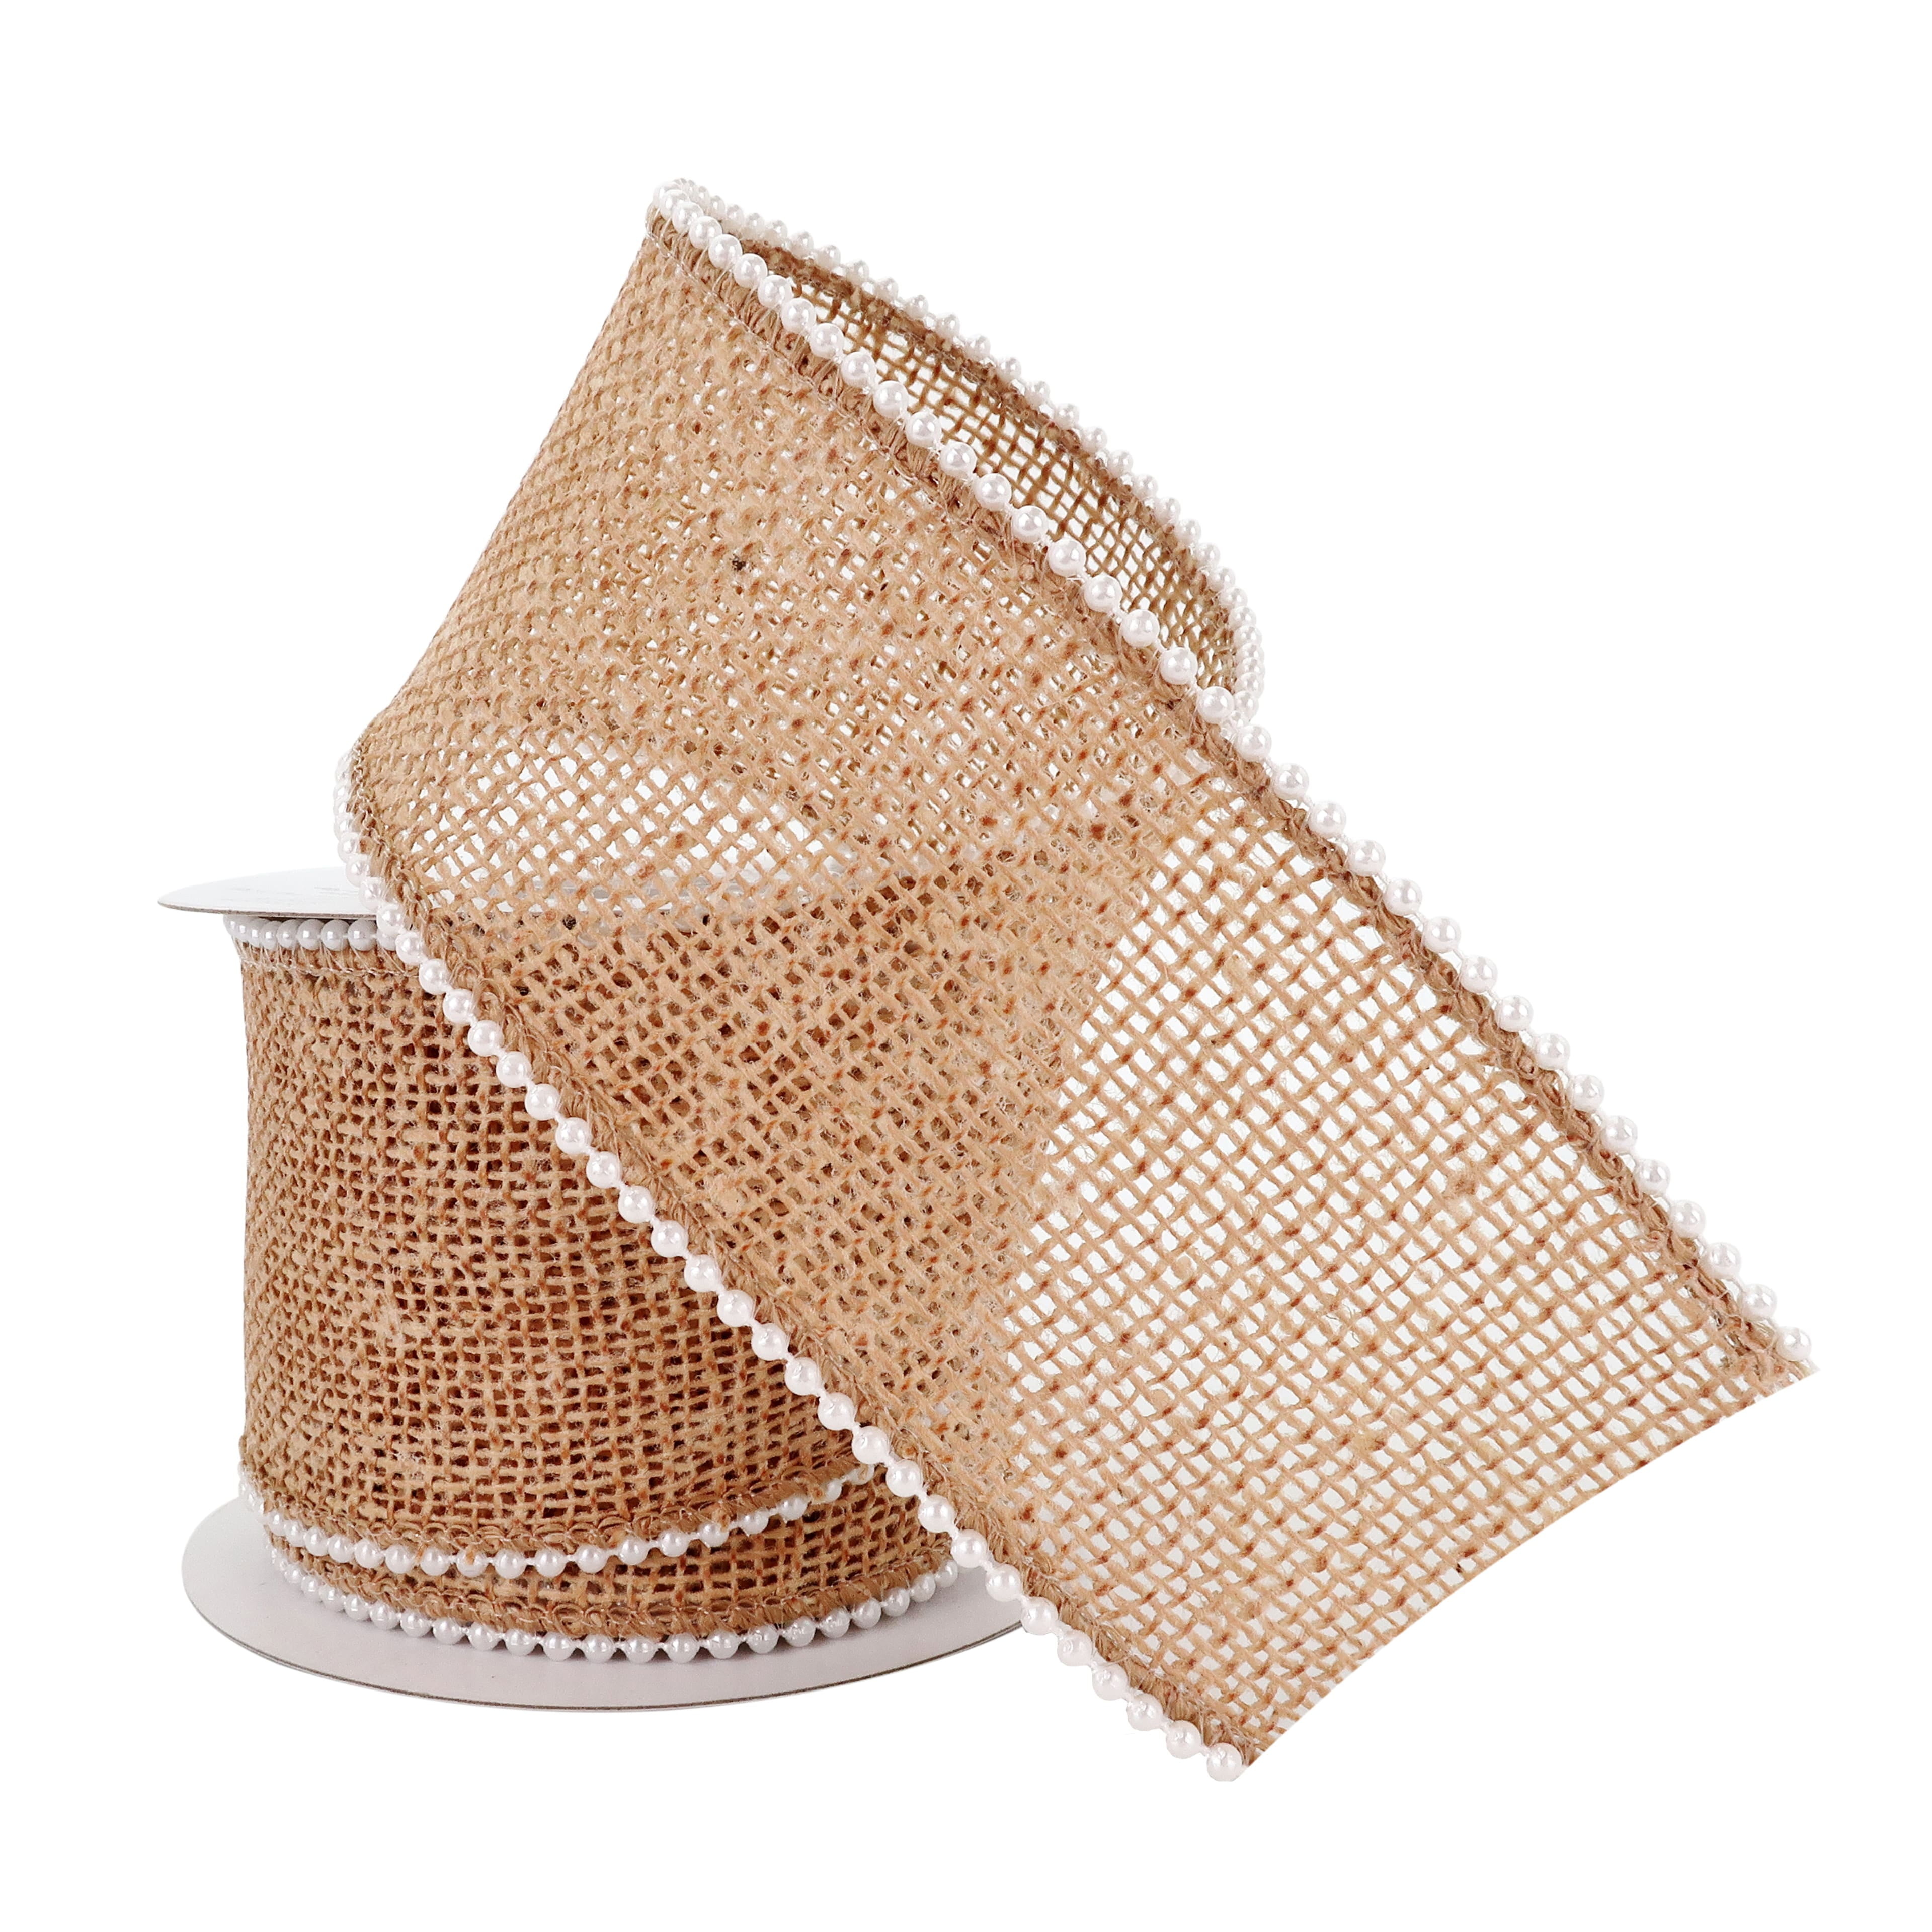 12 Pack: 2.5 inch Burlap Frayed Ribbon by Celebrate It Occasions, Size: 2.5 x 3yd, Beige